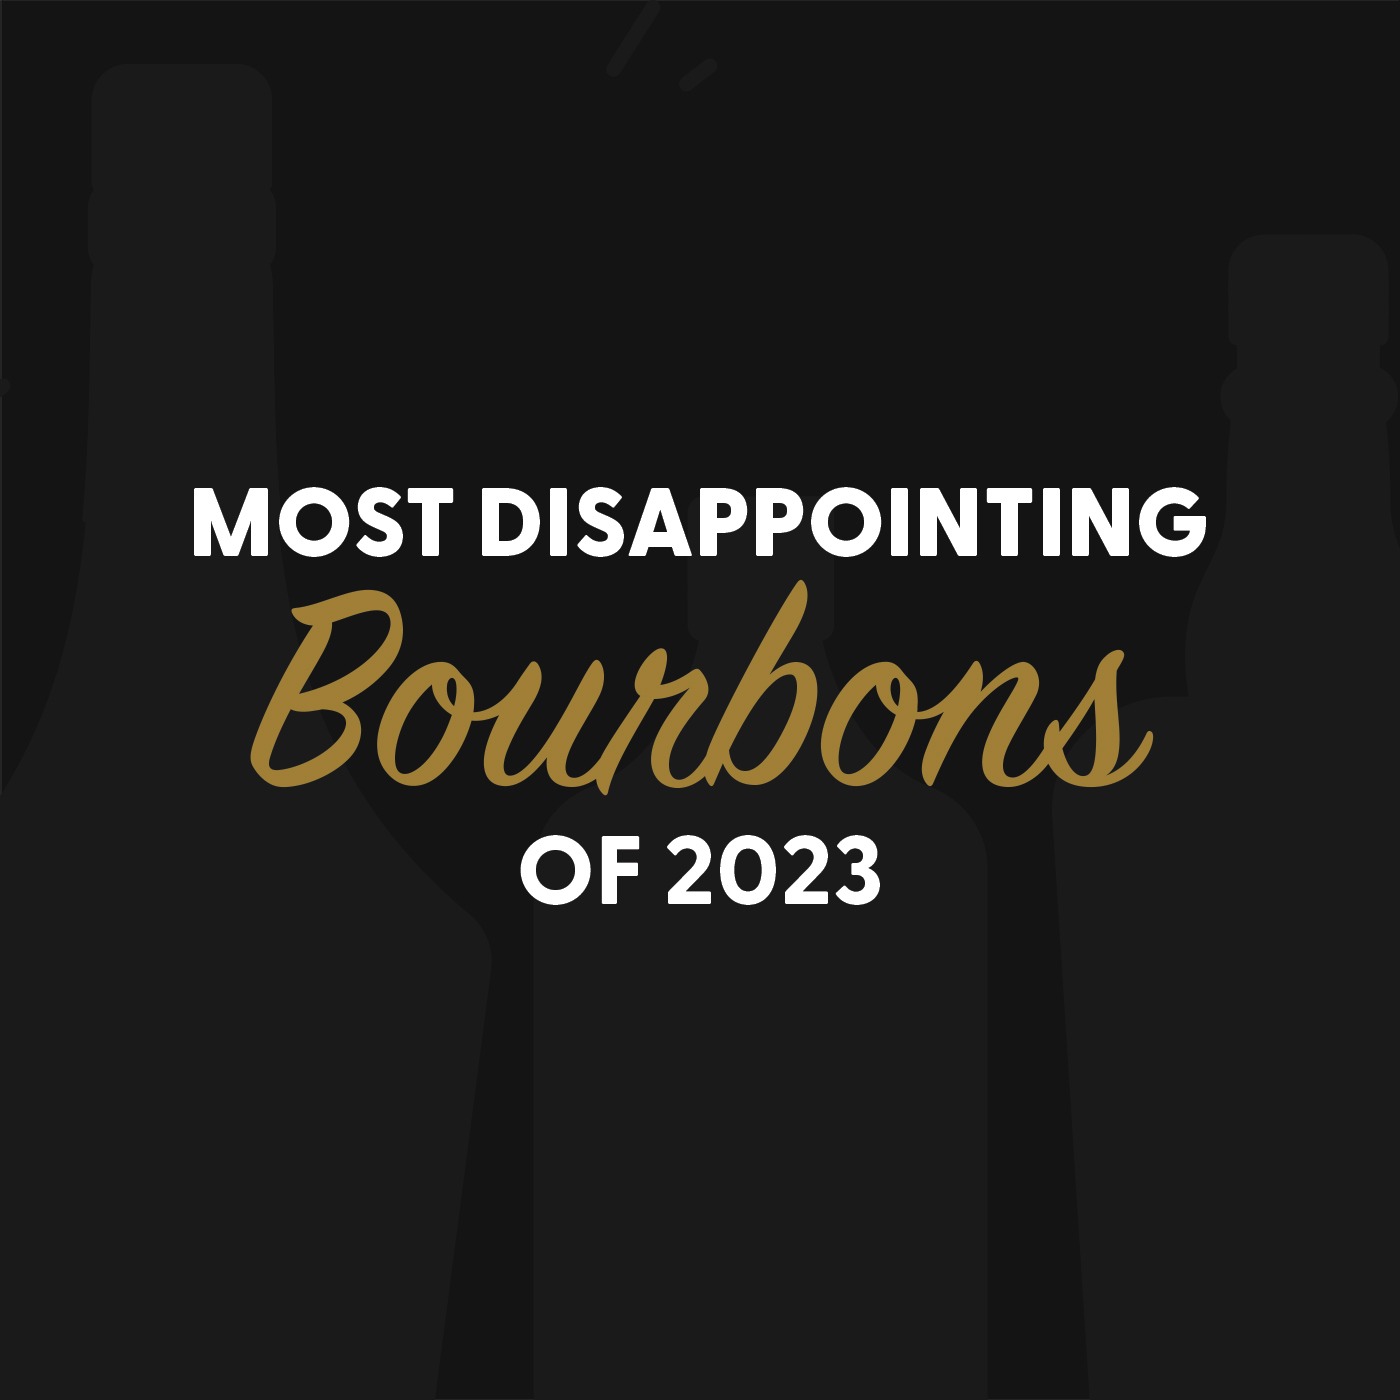 Most Disappointing Bourbons of 2023